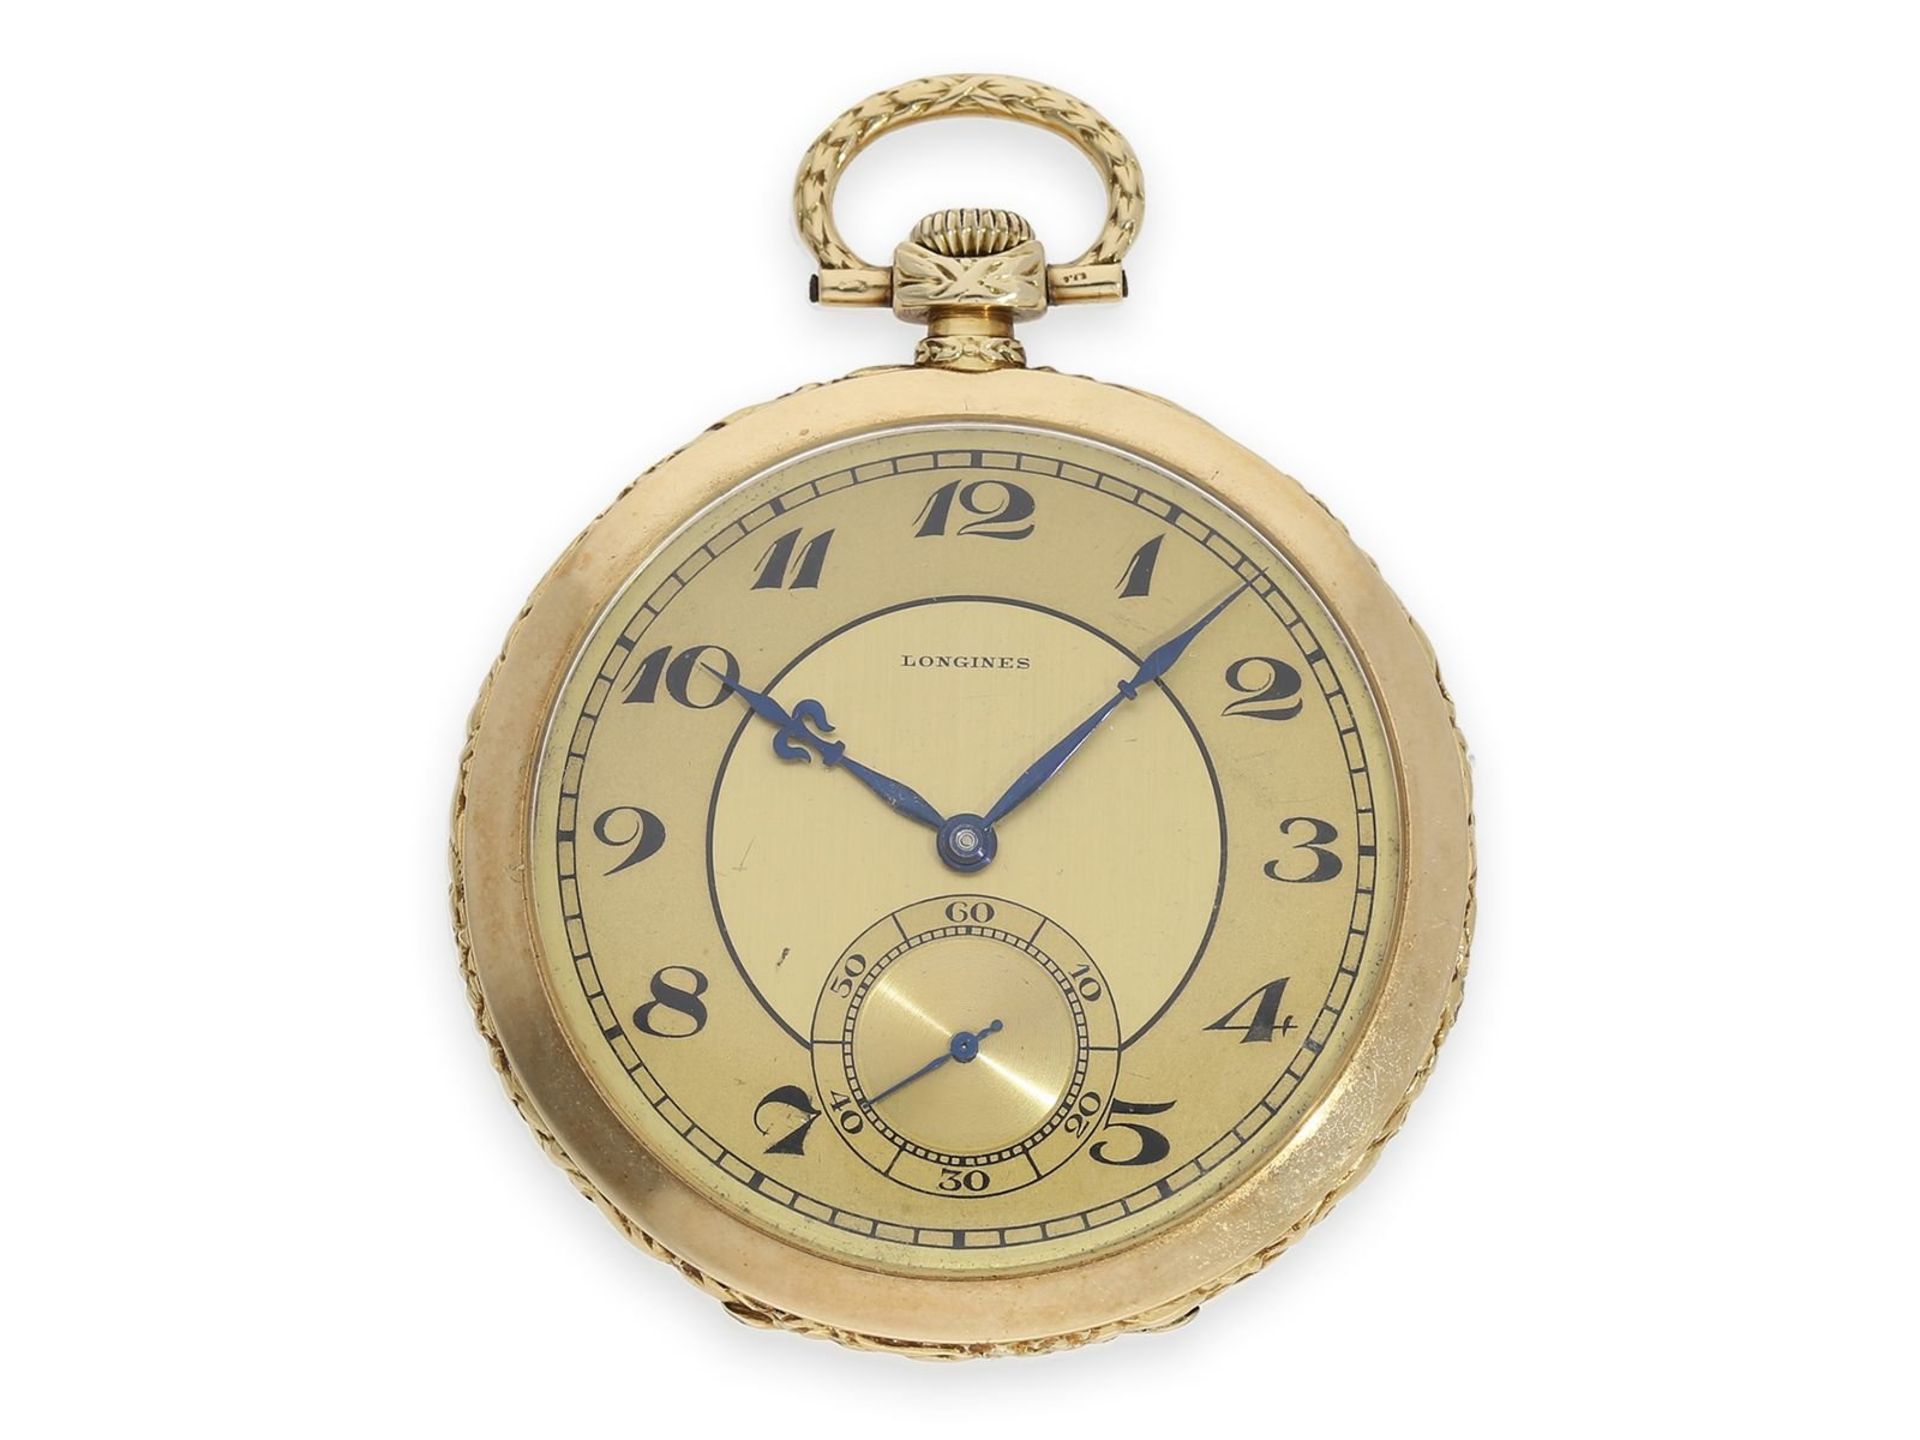 Pocket watch: extremely elegant and very fine Art Deco dress watch in the very rare chronometer